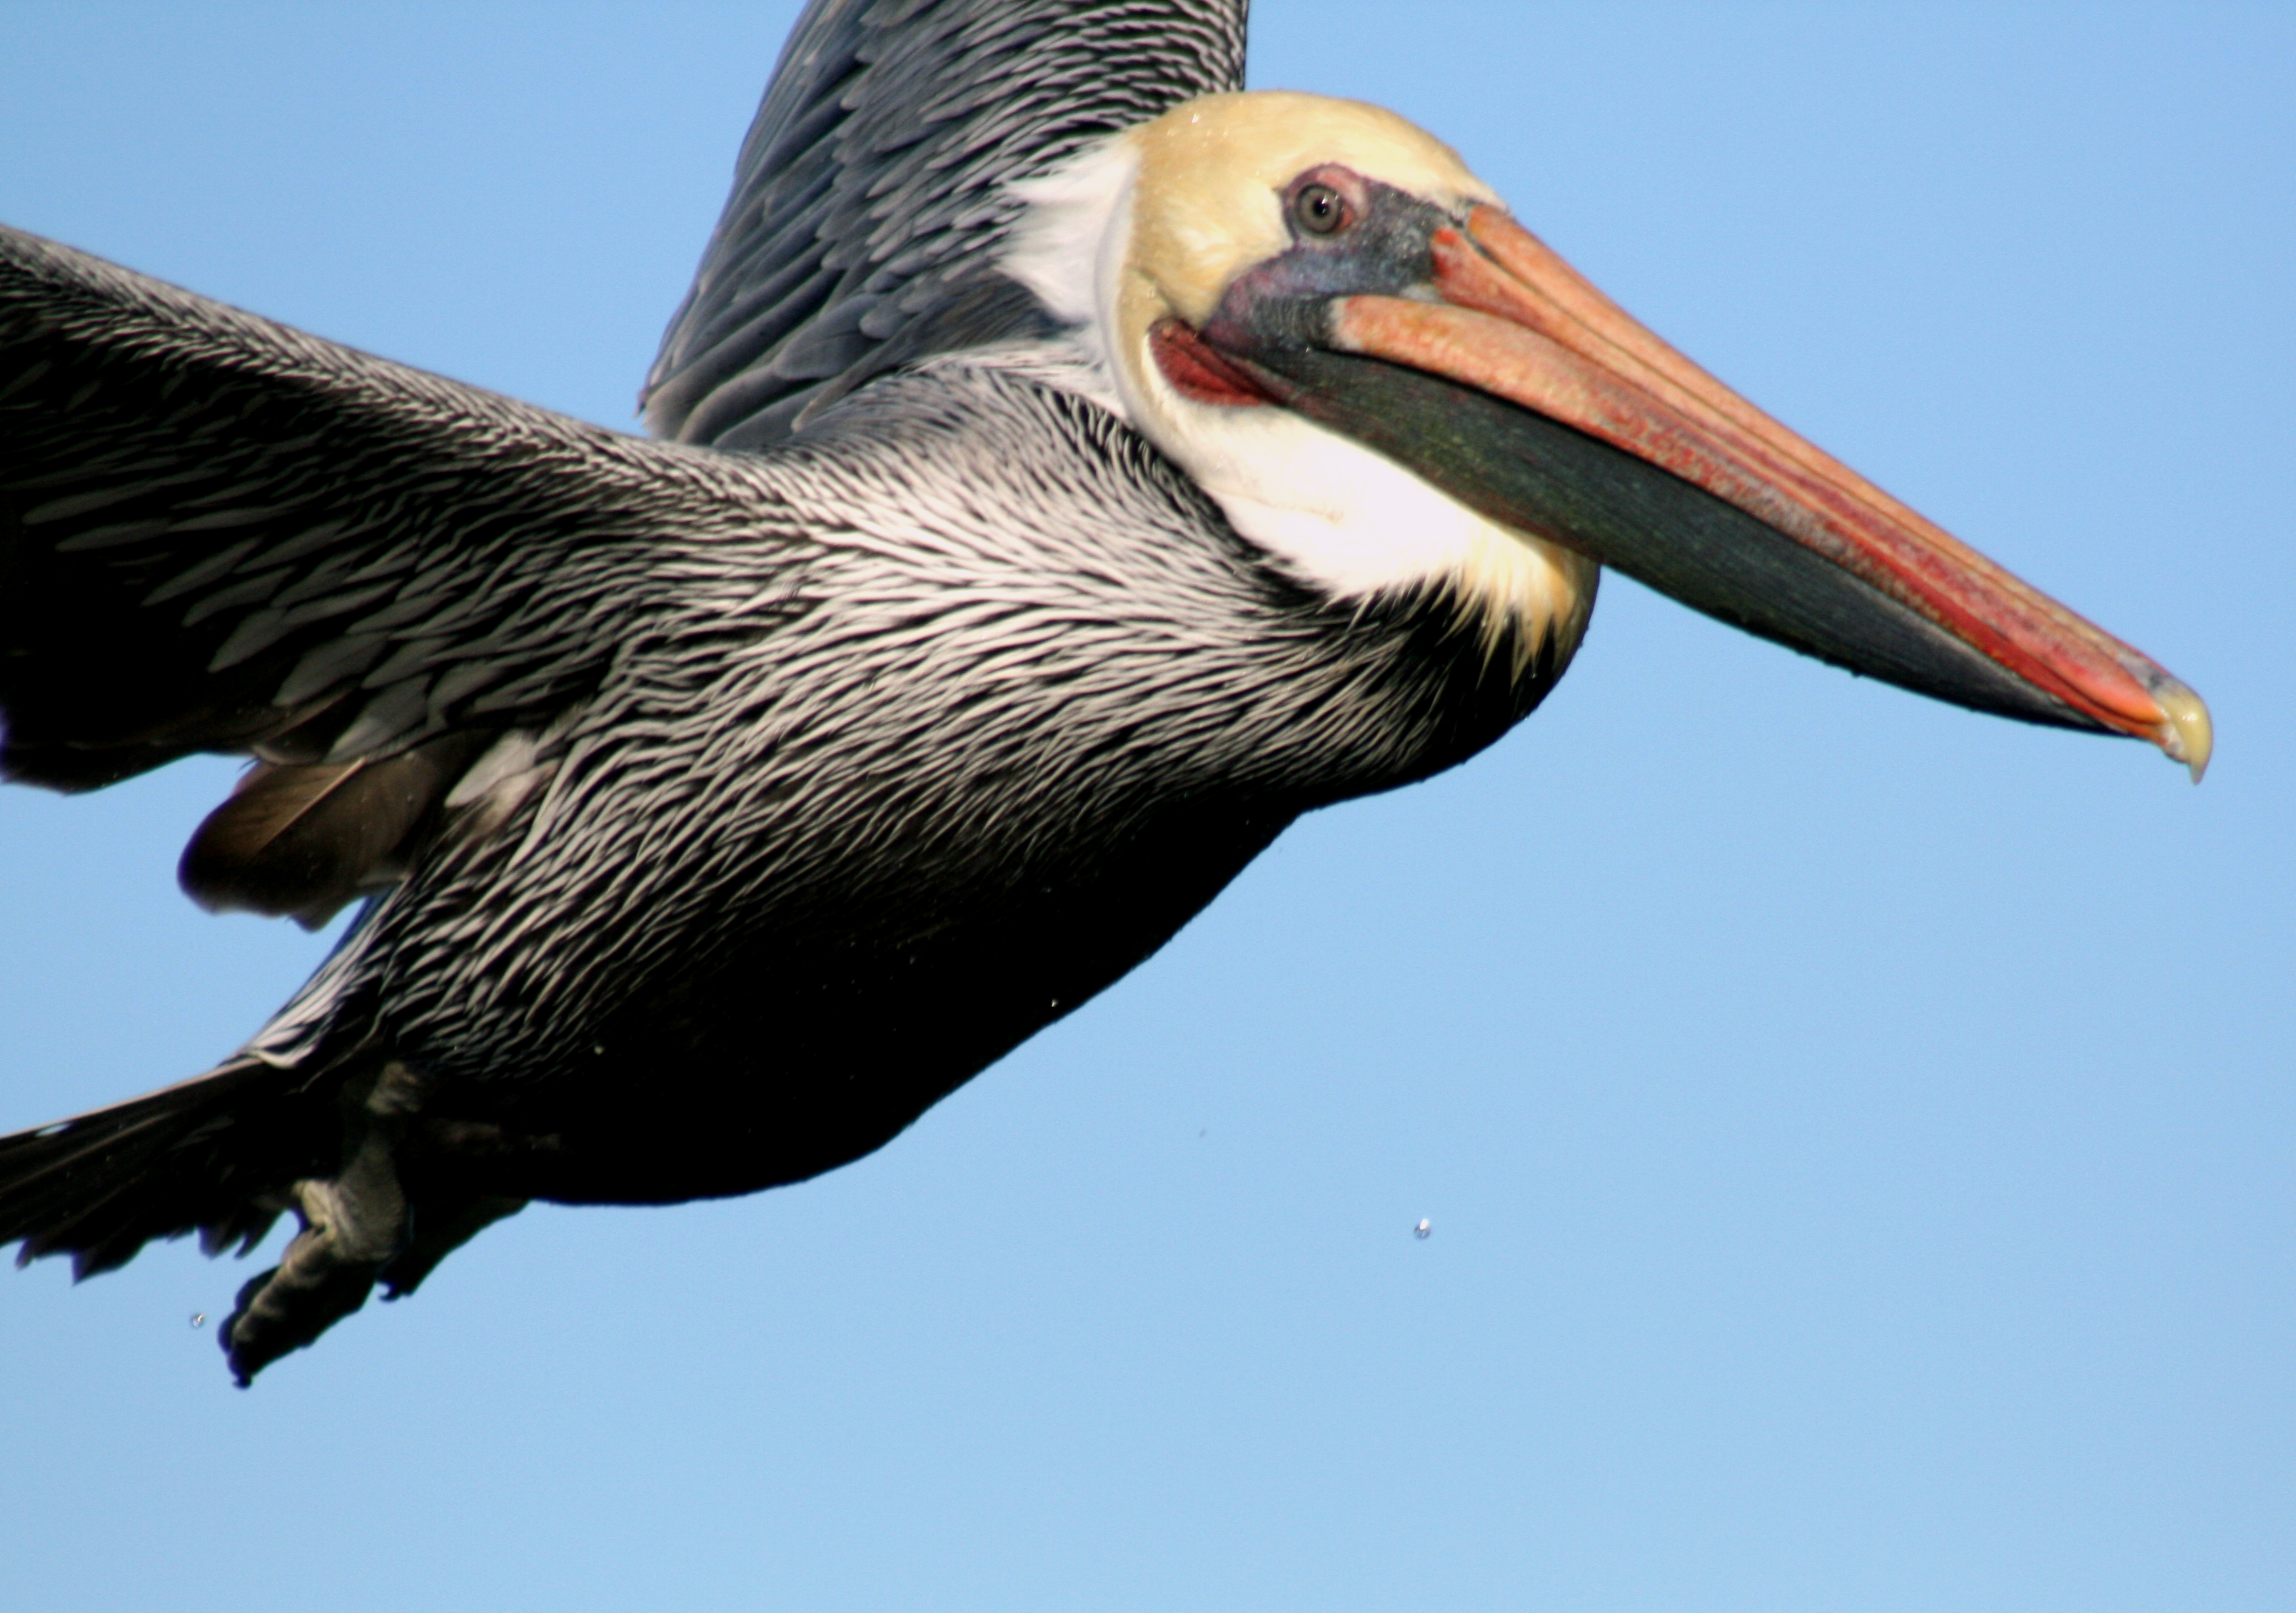 File:Close up of flying brown pelican.jpg - Wikimedia Commons